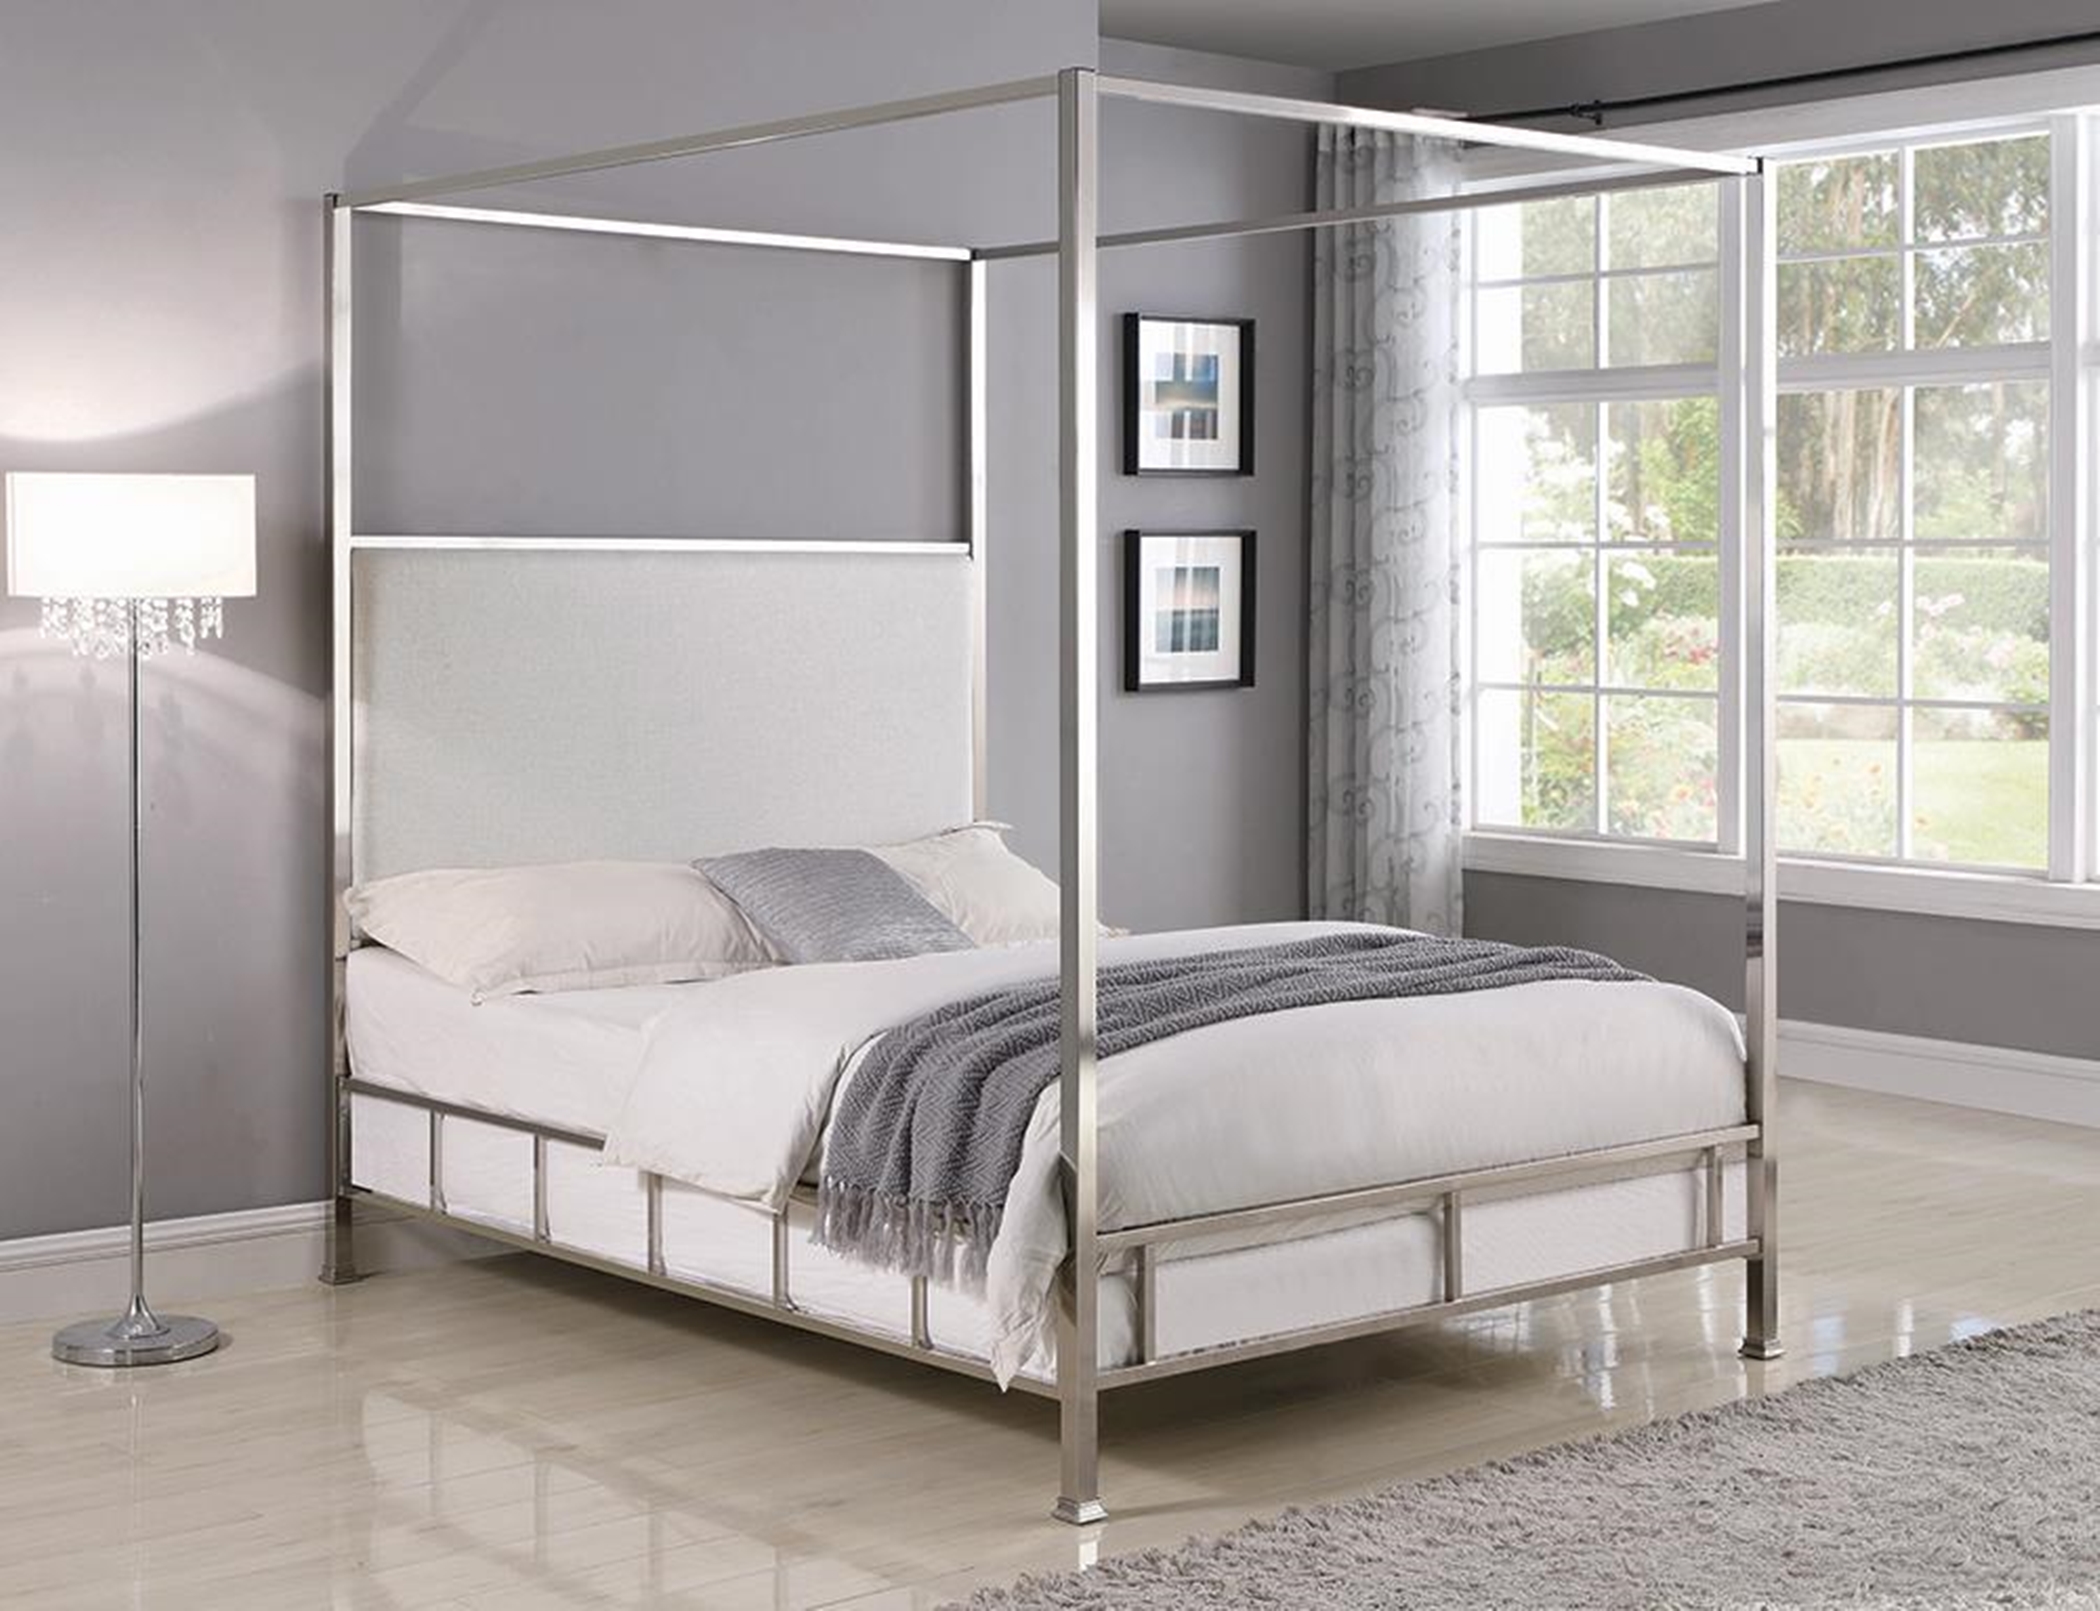 Claire Queen Bed